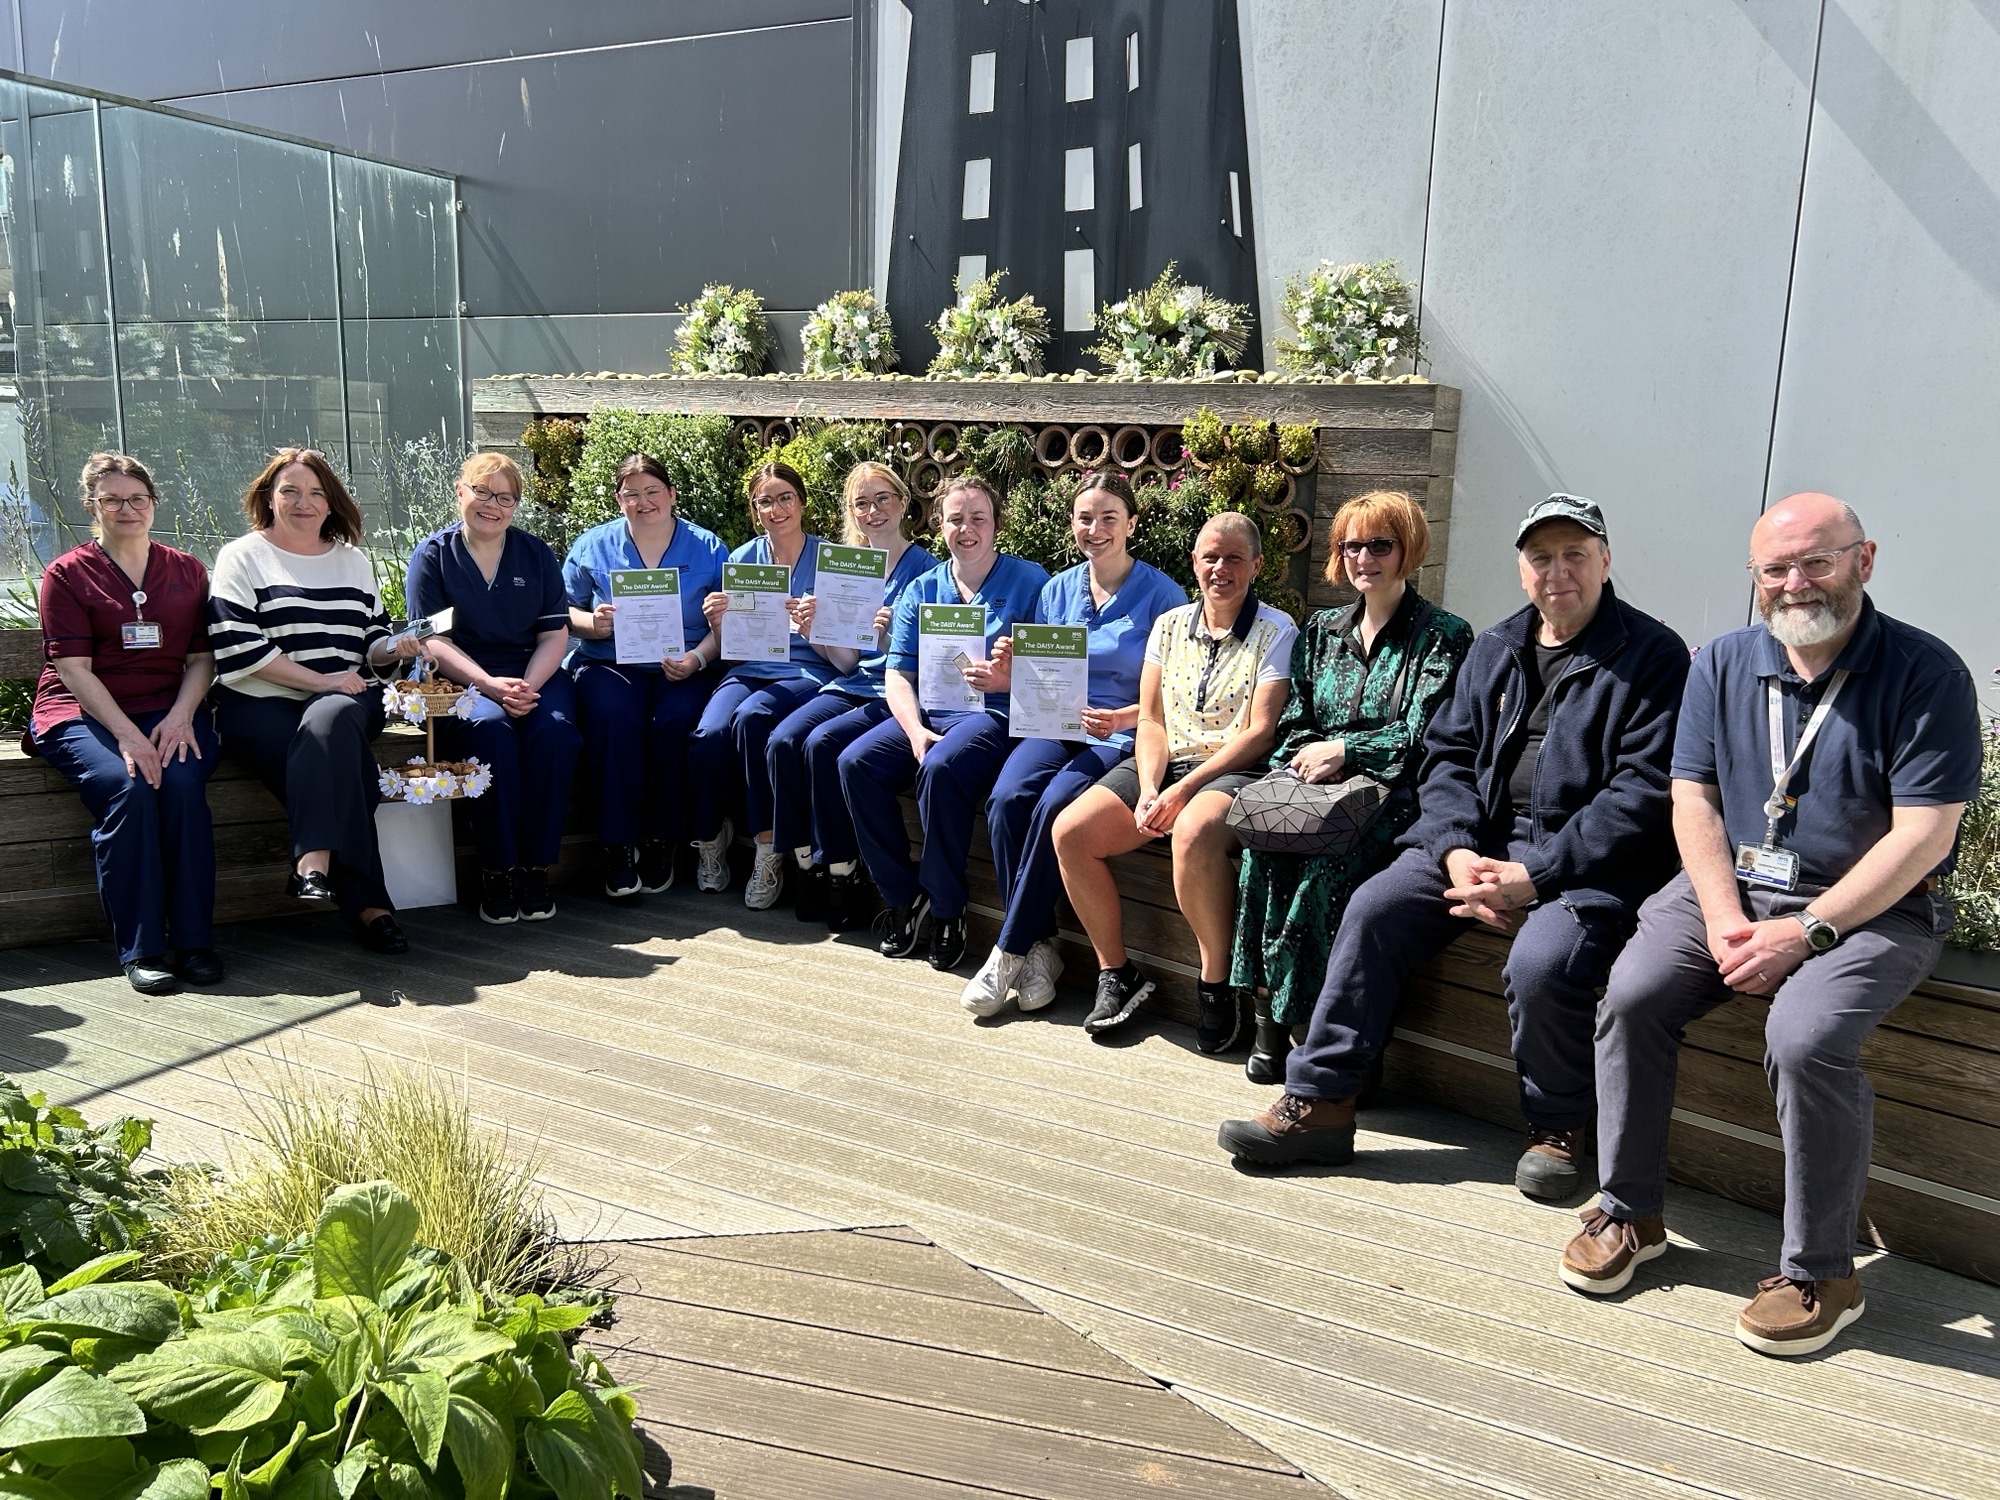 left to right: Denise Johnson, June Barnard, Louise Wilson, Mia Feeney, Paula Close, Molly Hay, Holly Gray, Amber O’Brian, and Wullie’s friends Louise Christie, and Natalie and Gordon Dodd, as well as Cameron Matthew in the roof garden at Aberdeen Royal Infirmary.